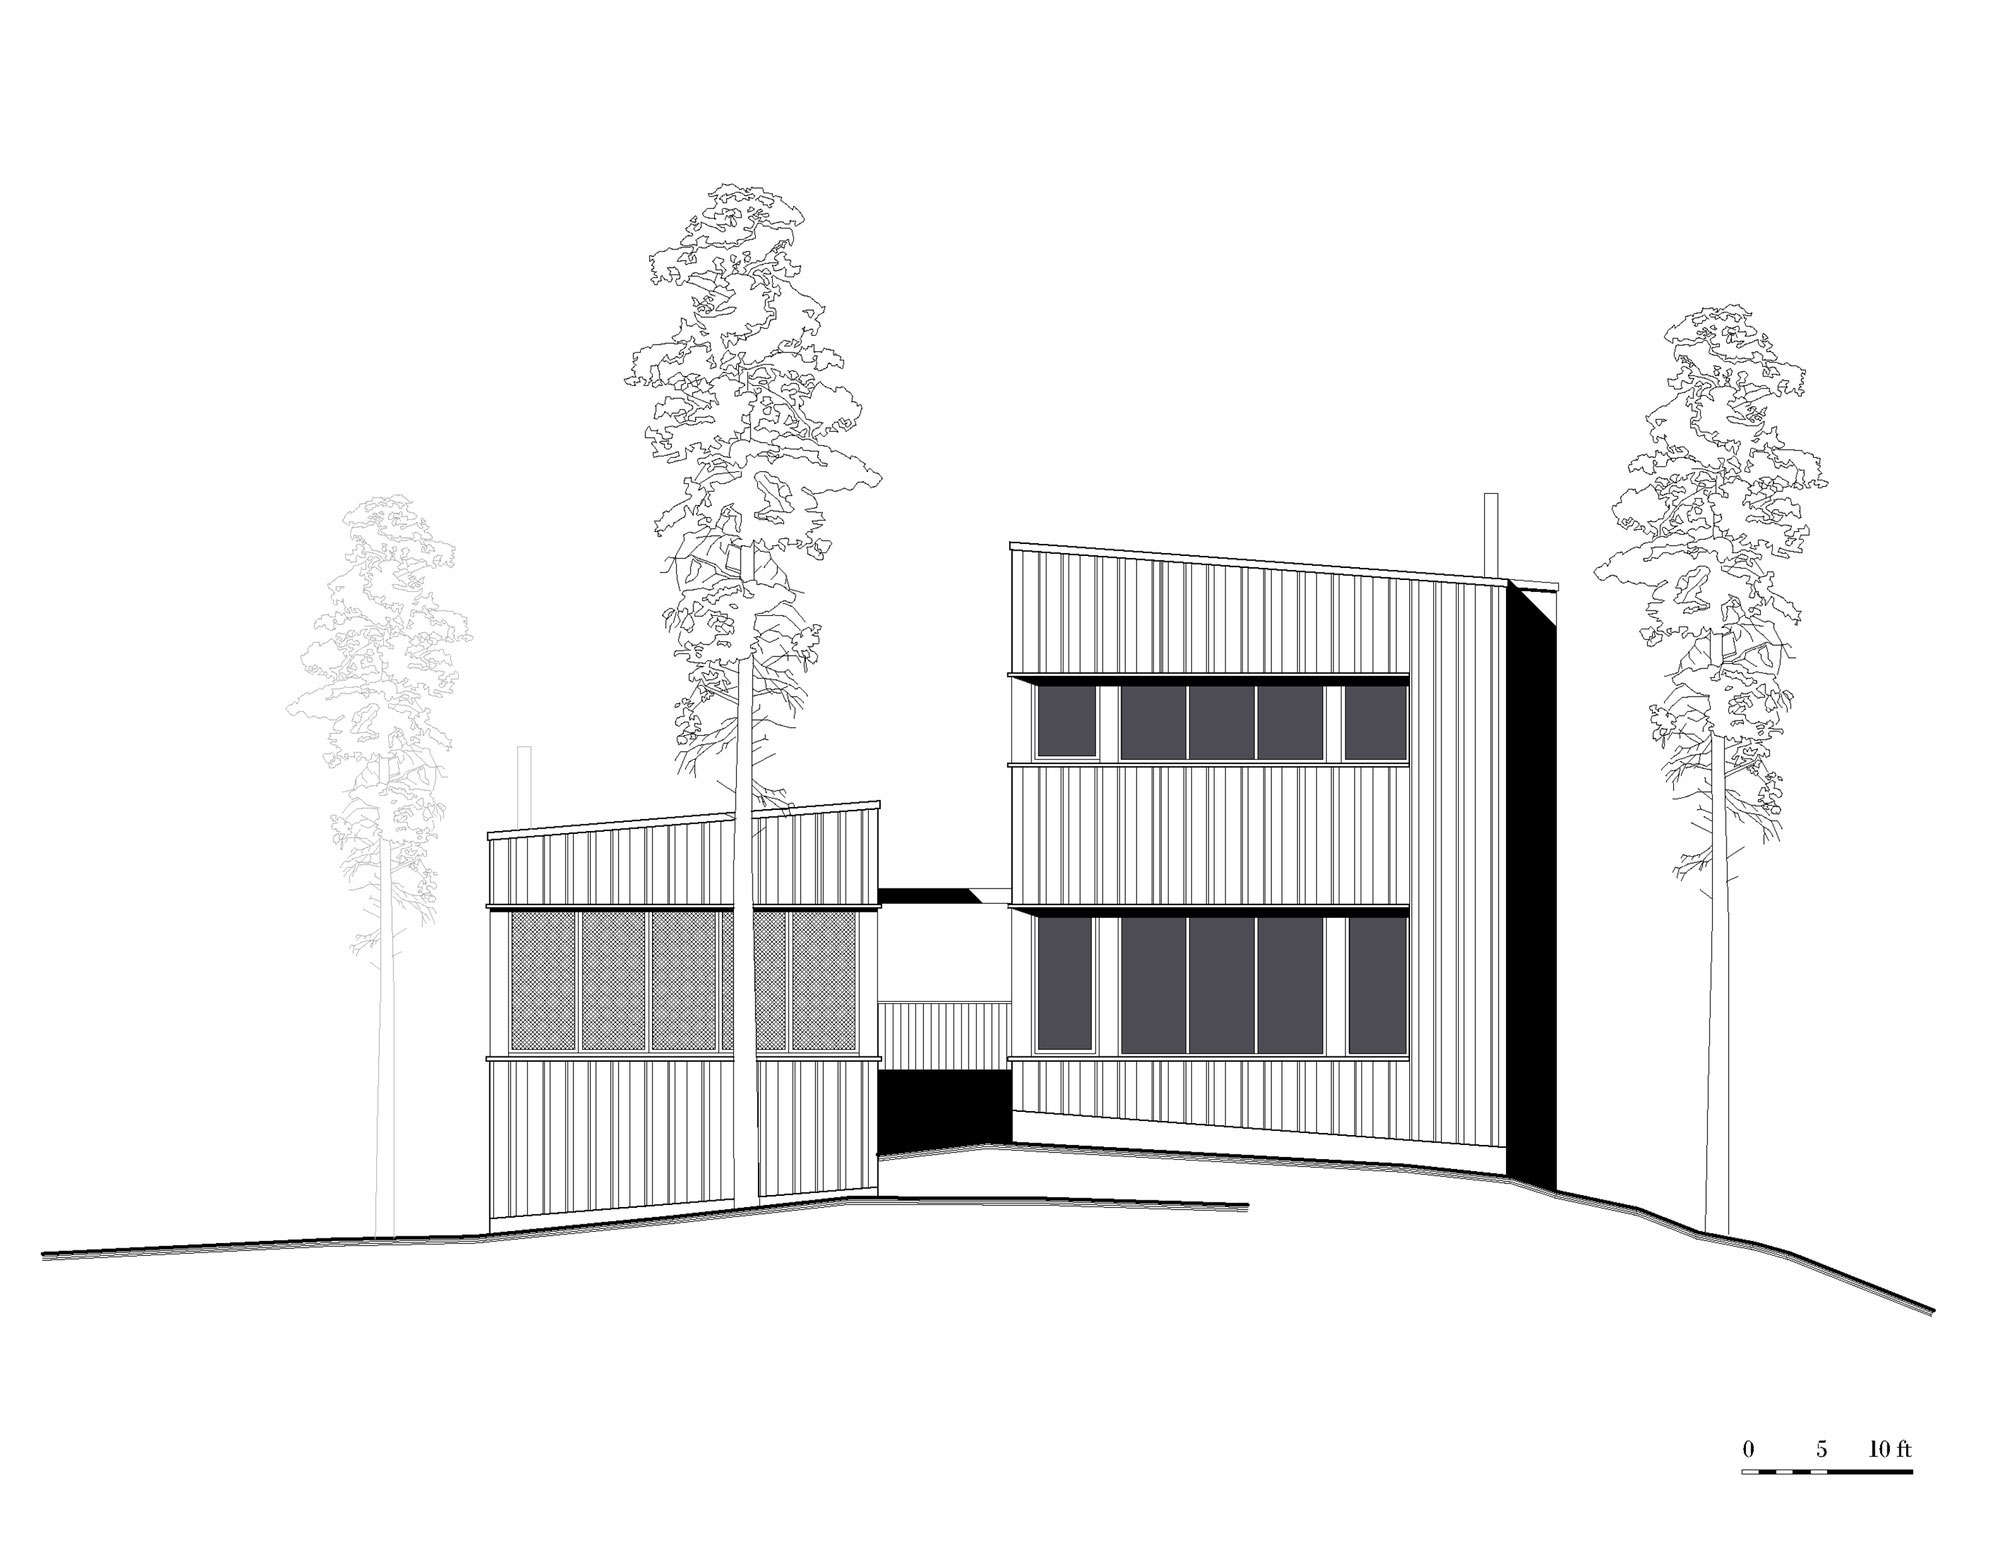 Lombok Architect - Light-Filled-House-in-the-Forest Plans 2